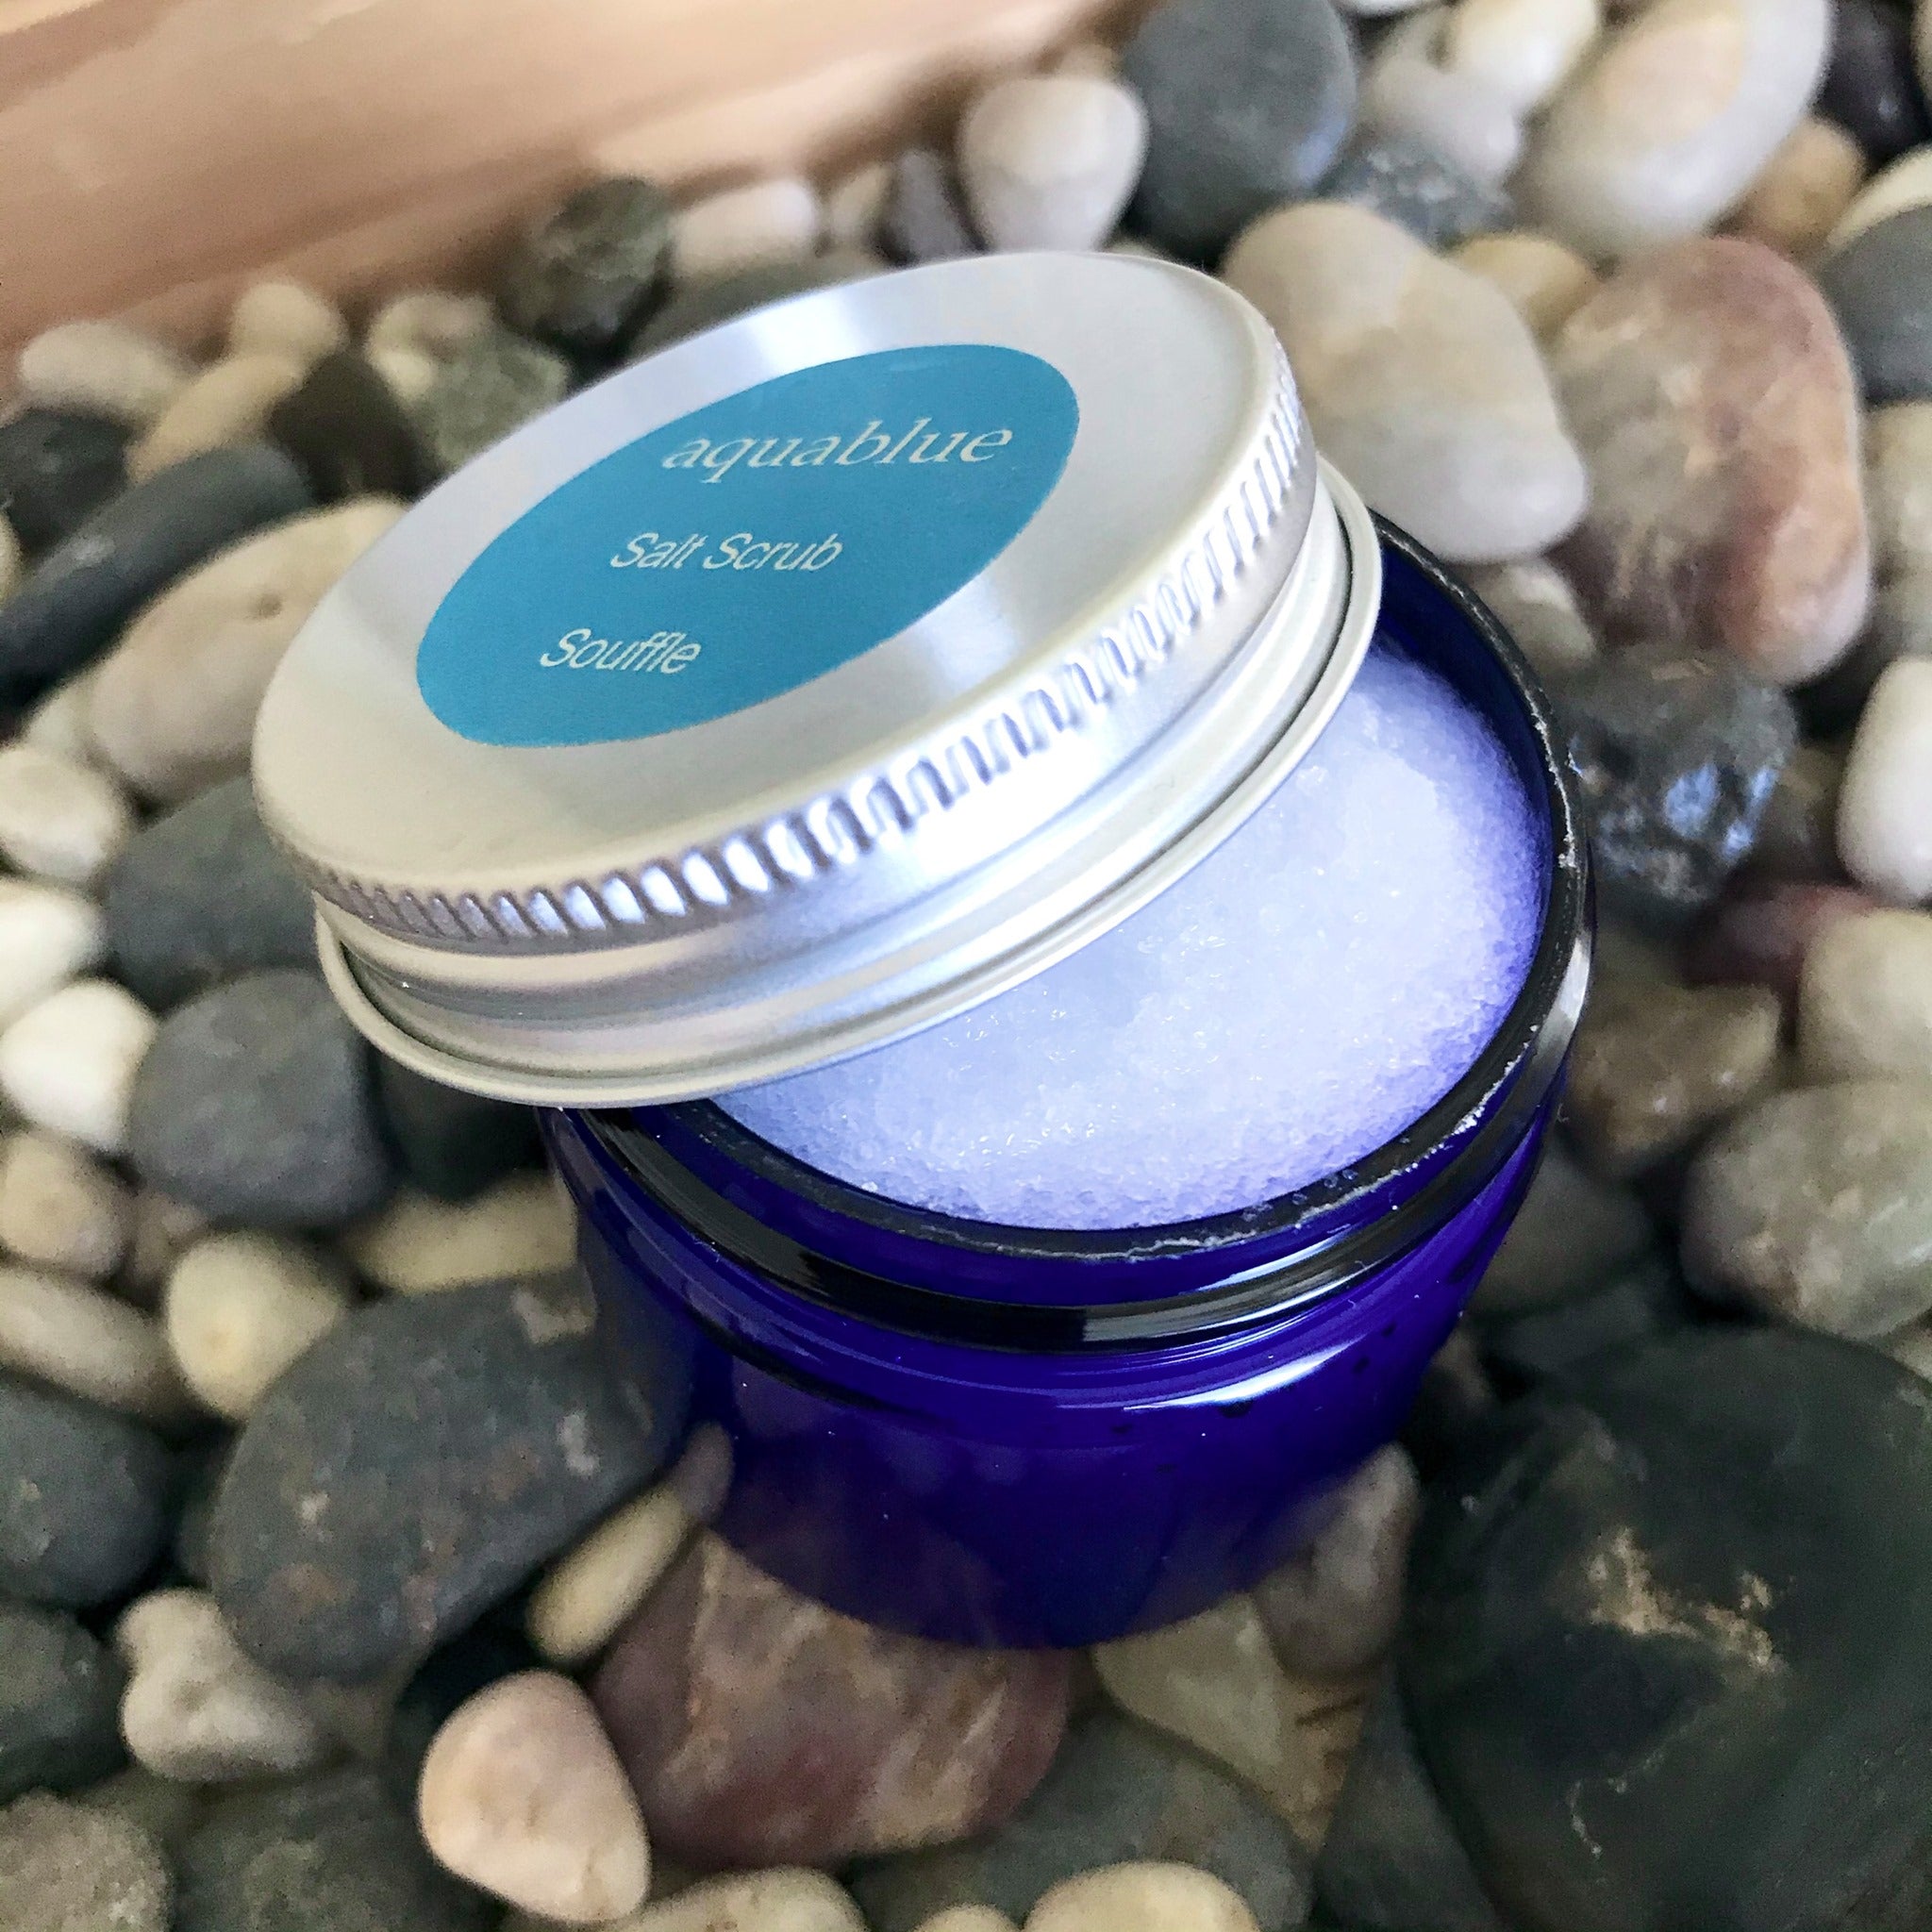 Our salt scrub souffle is made of a soap base, so it won't dry out your skin. PLUS, it is unscented and perfect for mixing with a bit of your favorite essential oil for a custom shower experience!